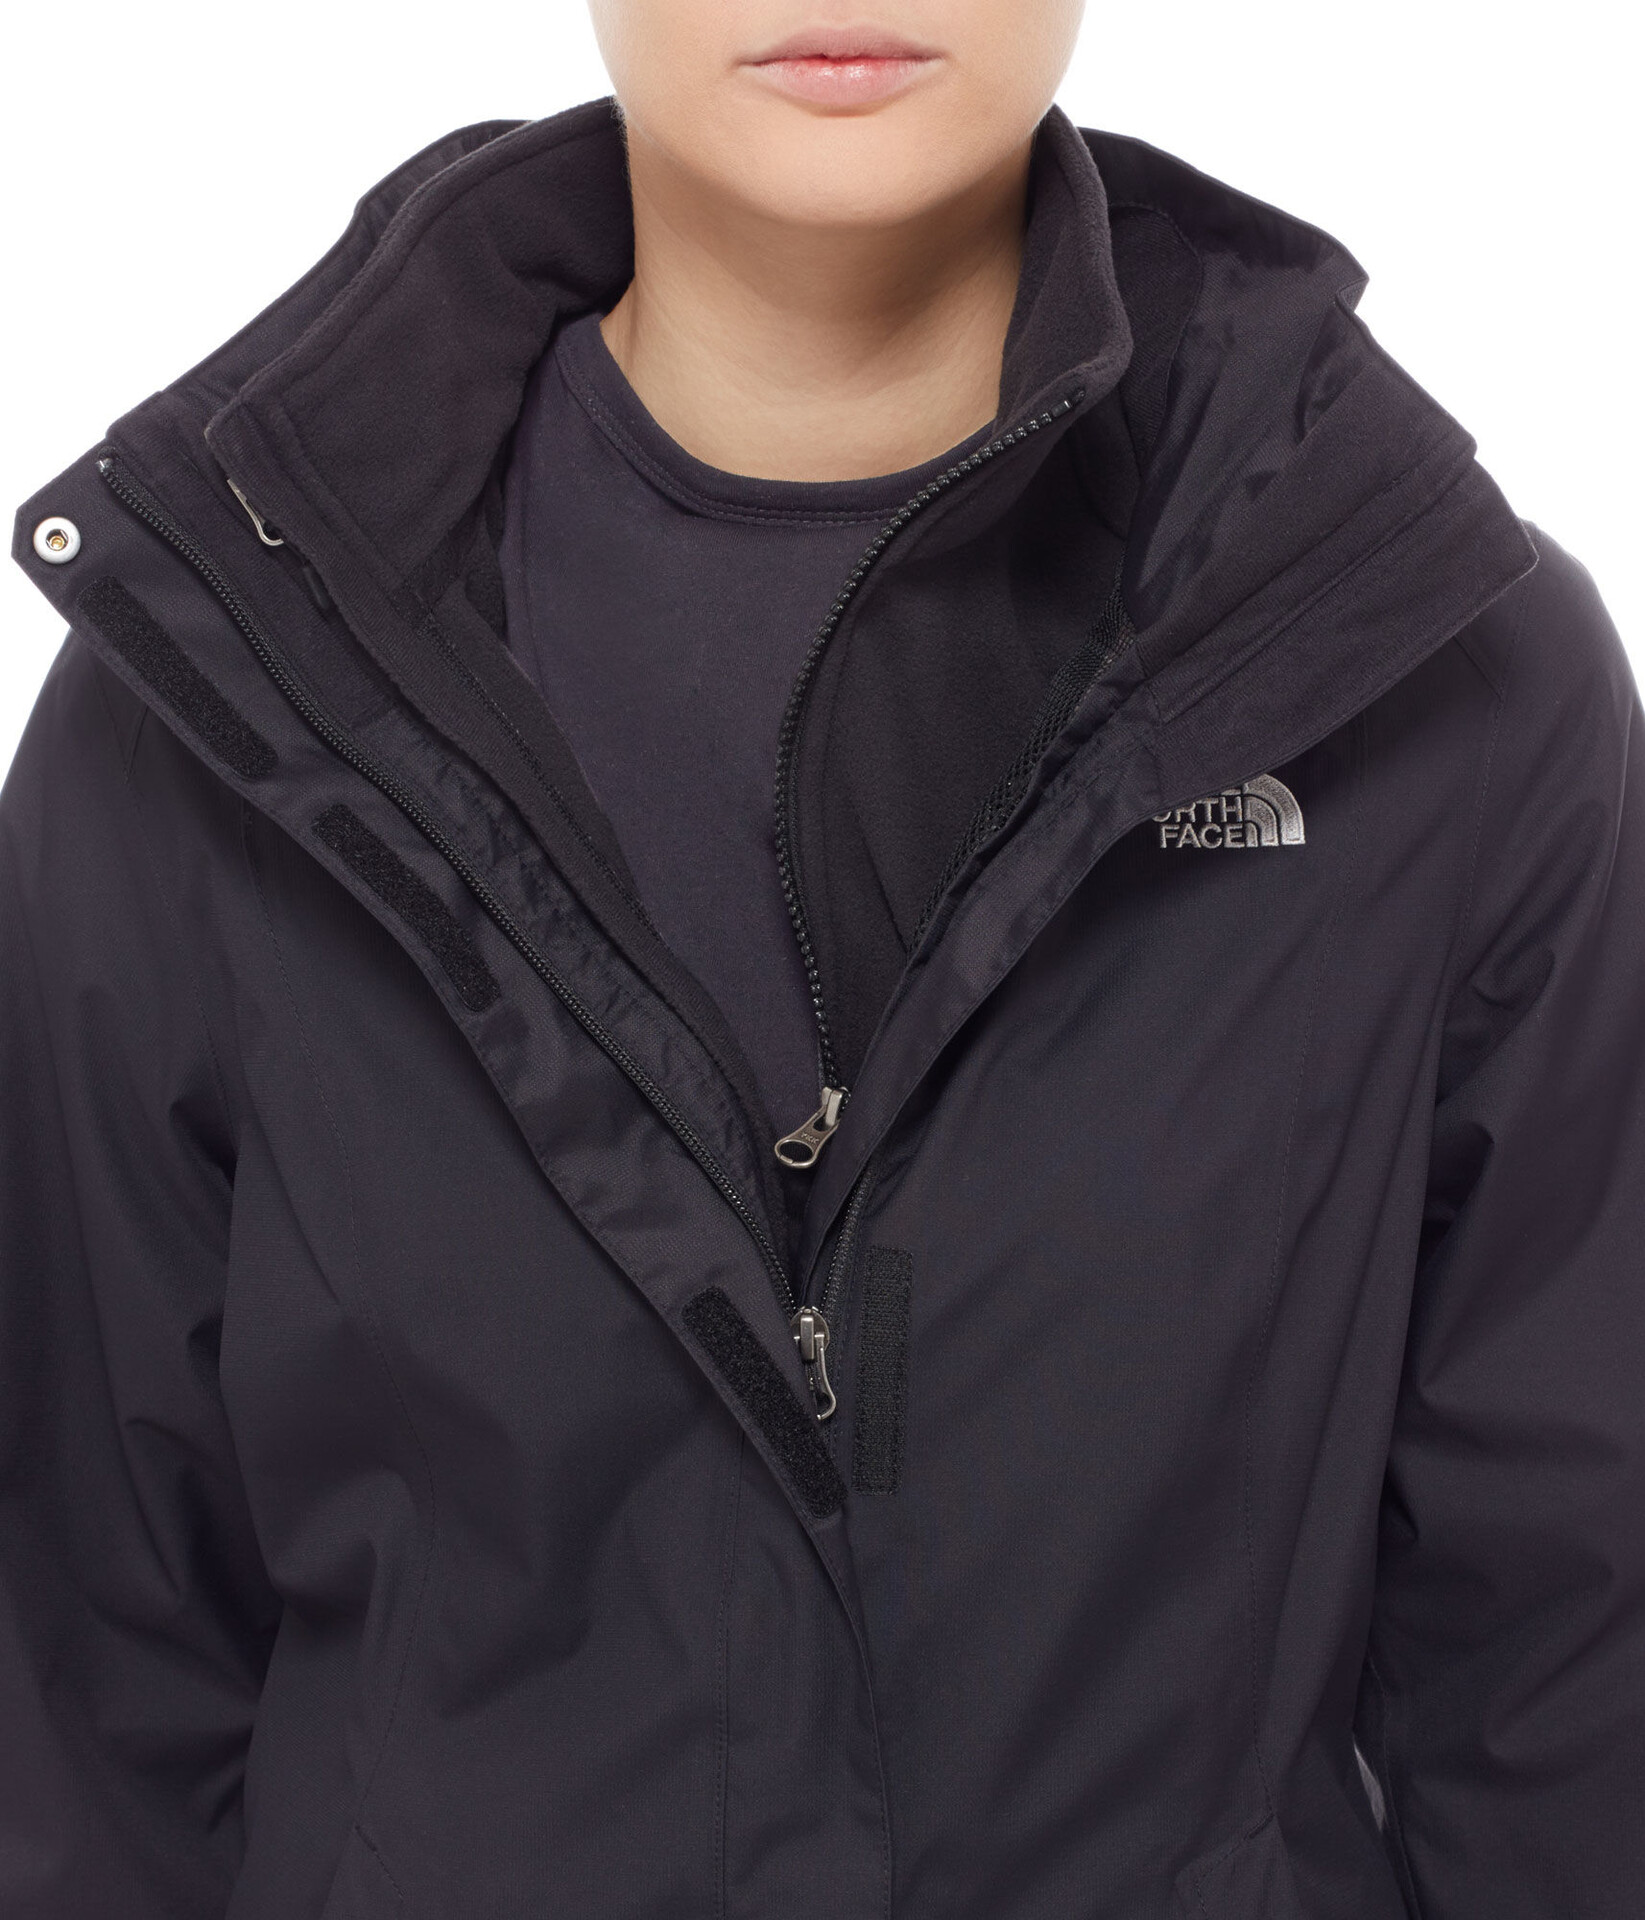 the north face evolve ii triclimate jas